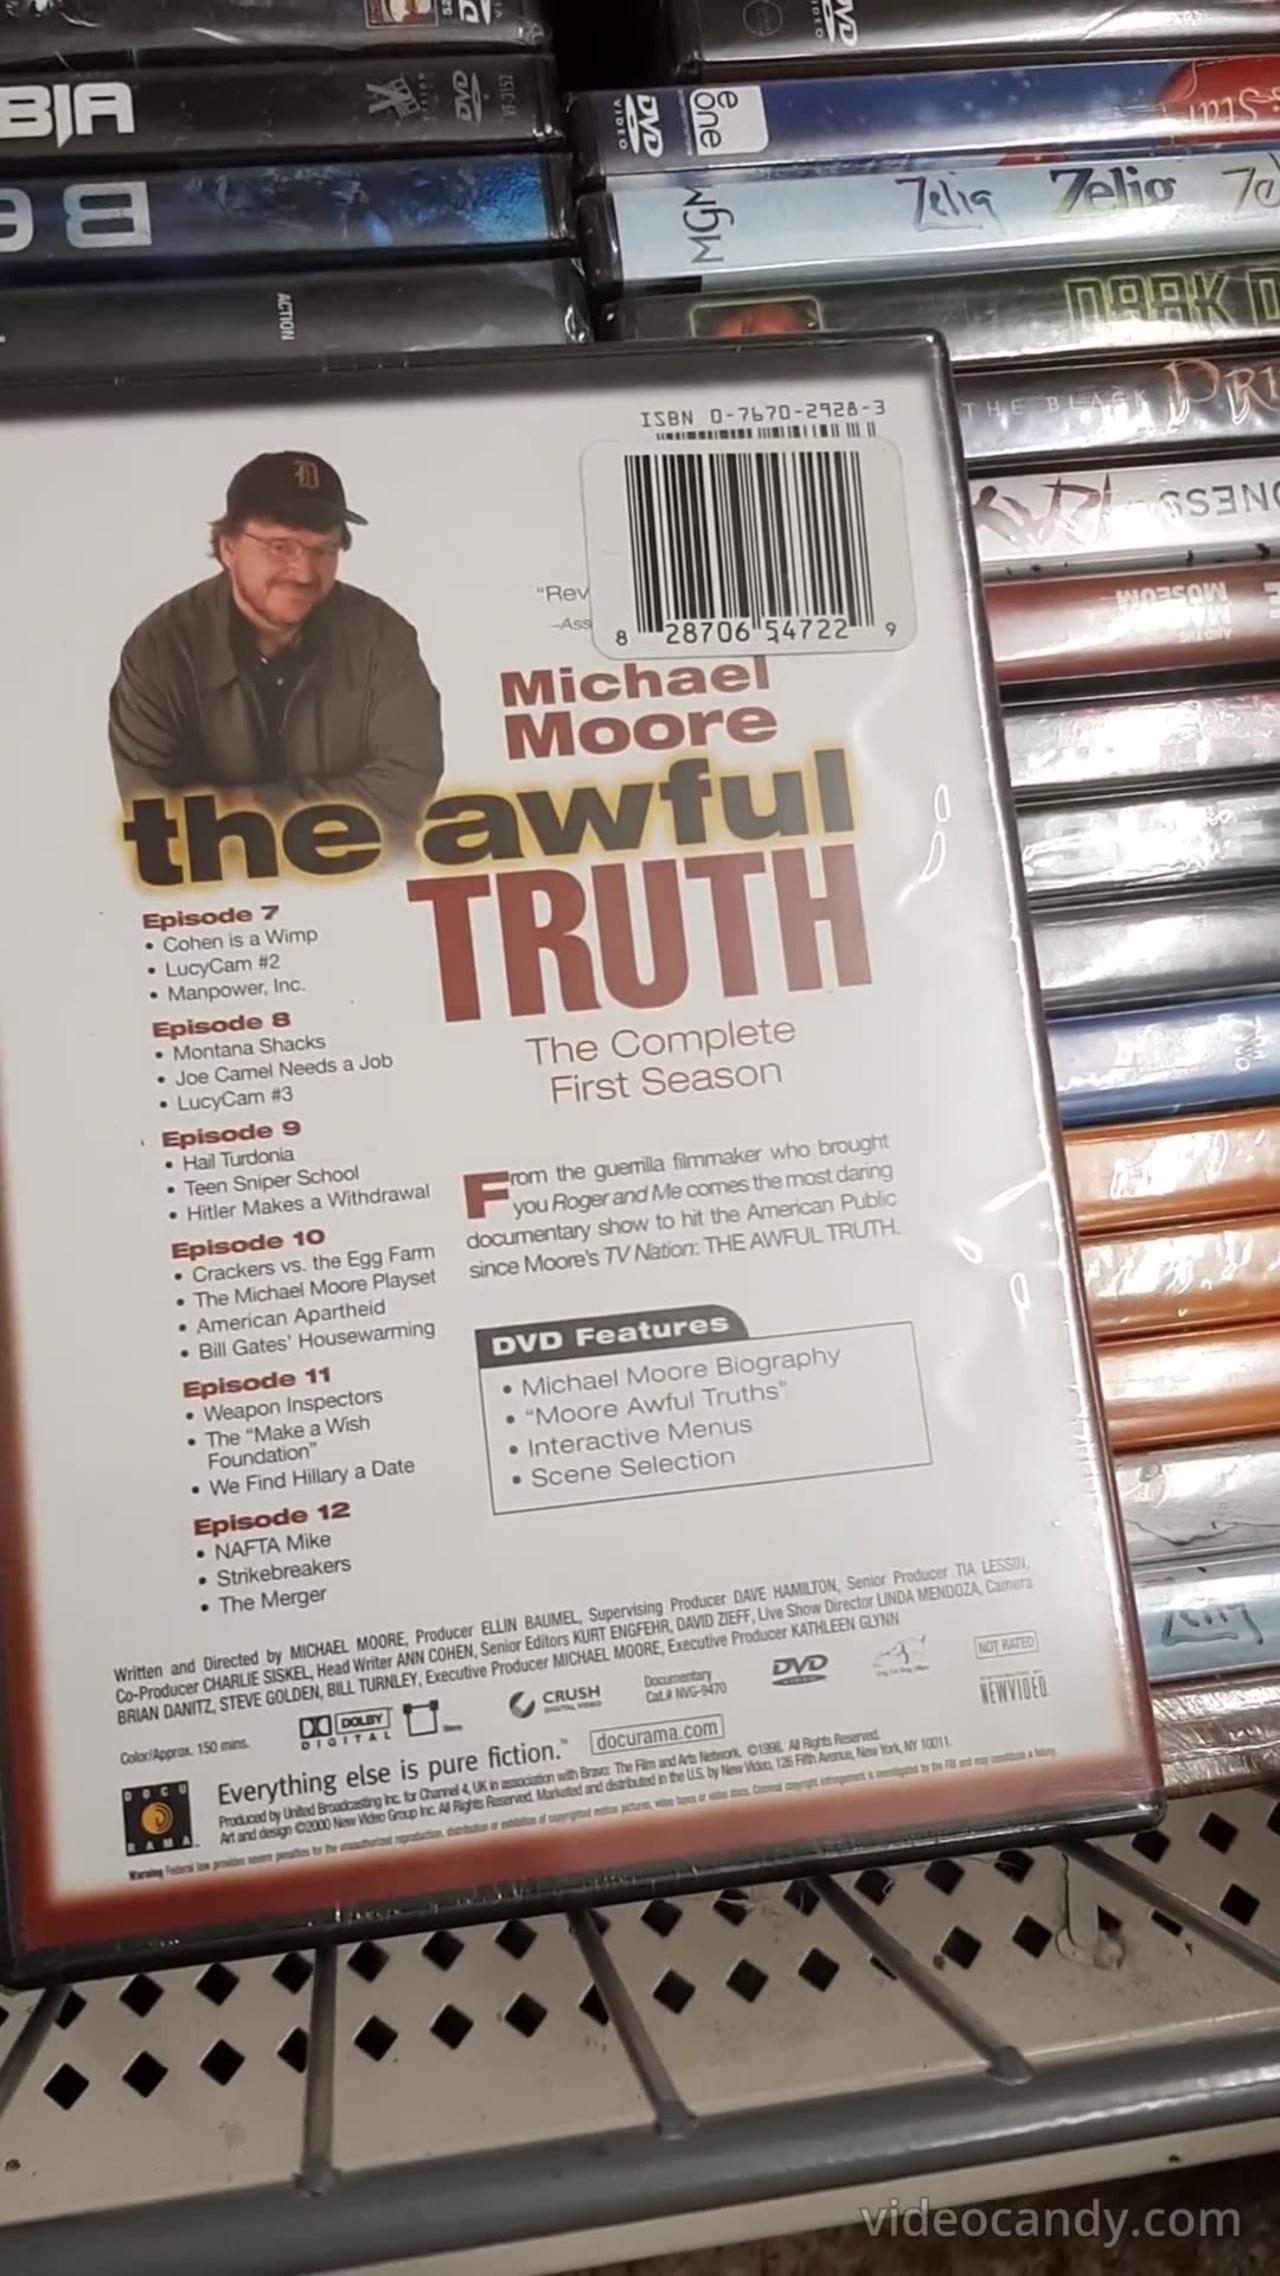 Michael Moore DVD at Dollar Tree - The Awful Truth, Walking Oxymoron